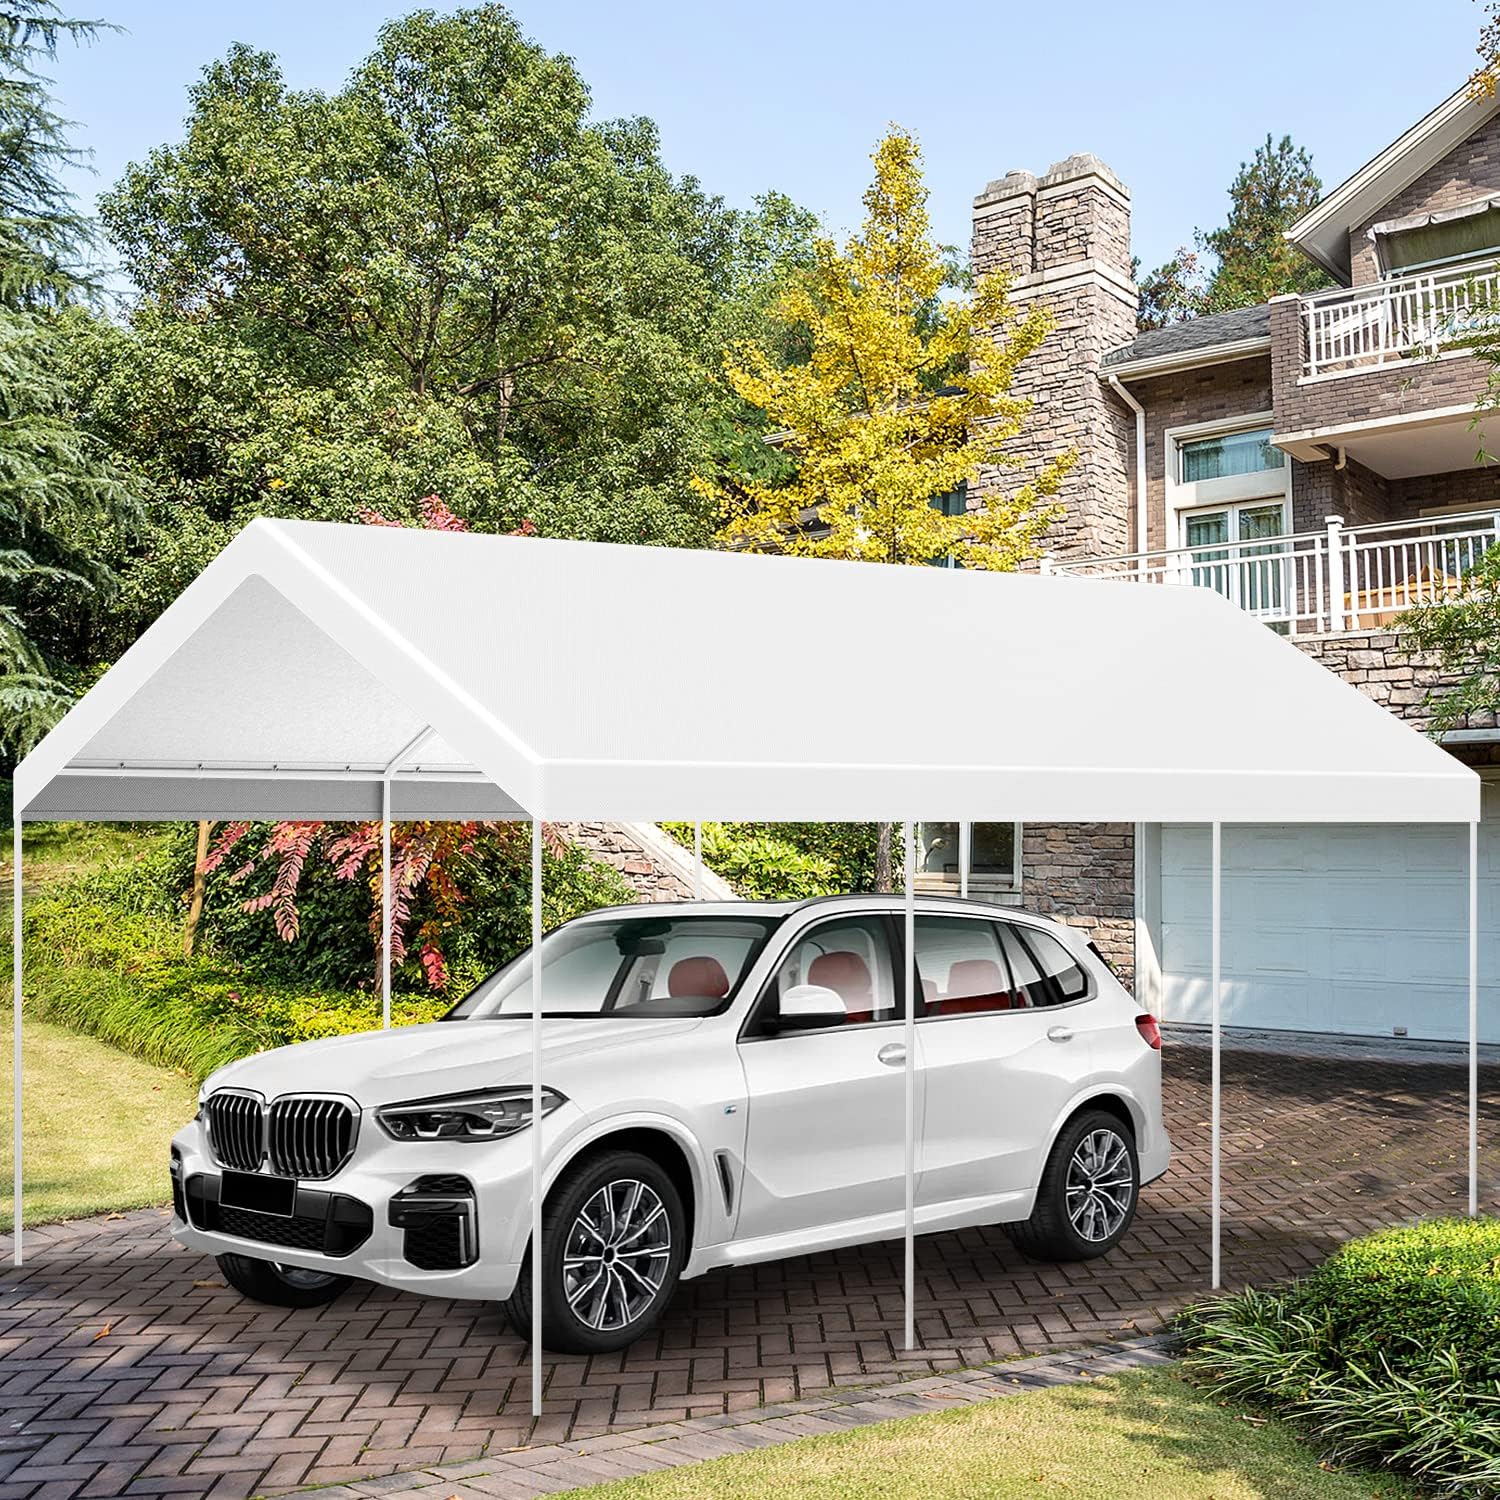 Dreamall Direct 10'x20' Carport Car Replacement Canopy Cover Outdoor for Tent Party Top Garage Shelter Cover with 26 Ball Bungees(Only Cover, F